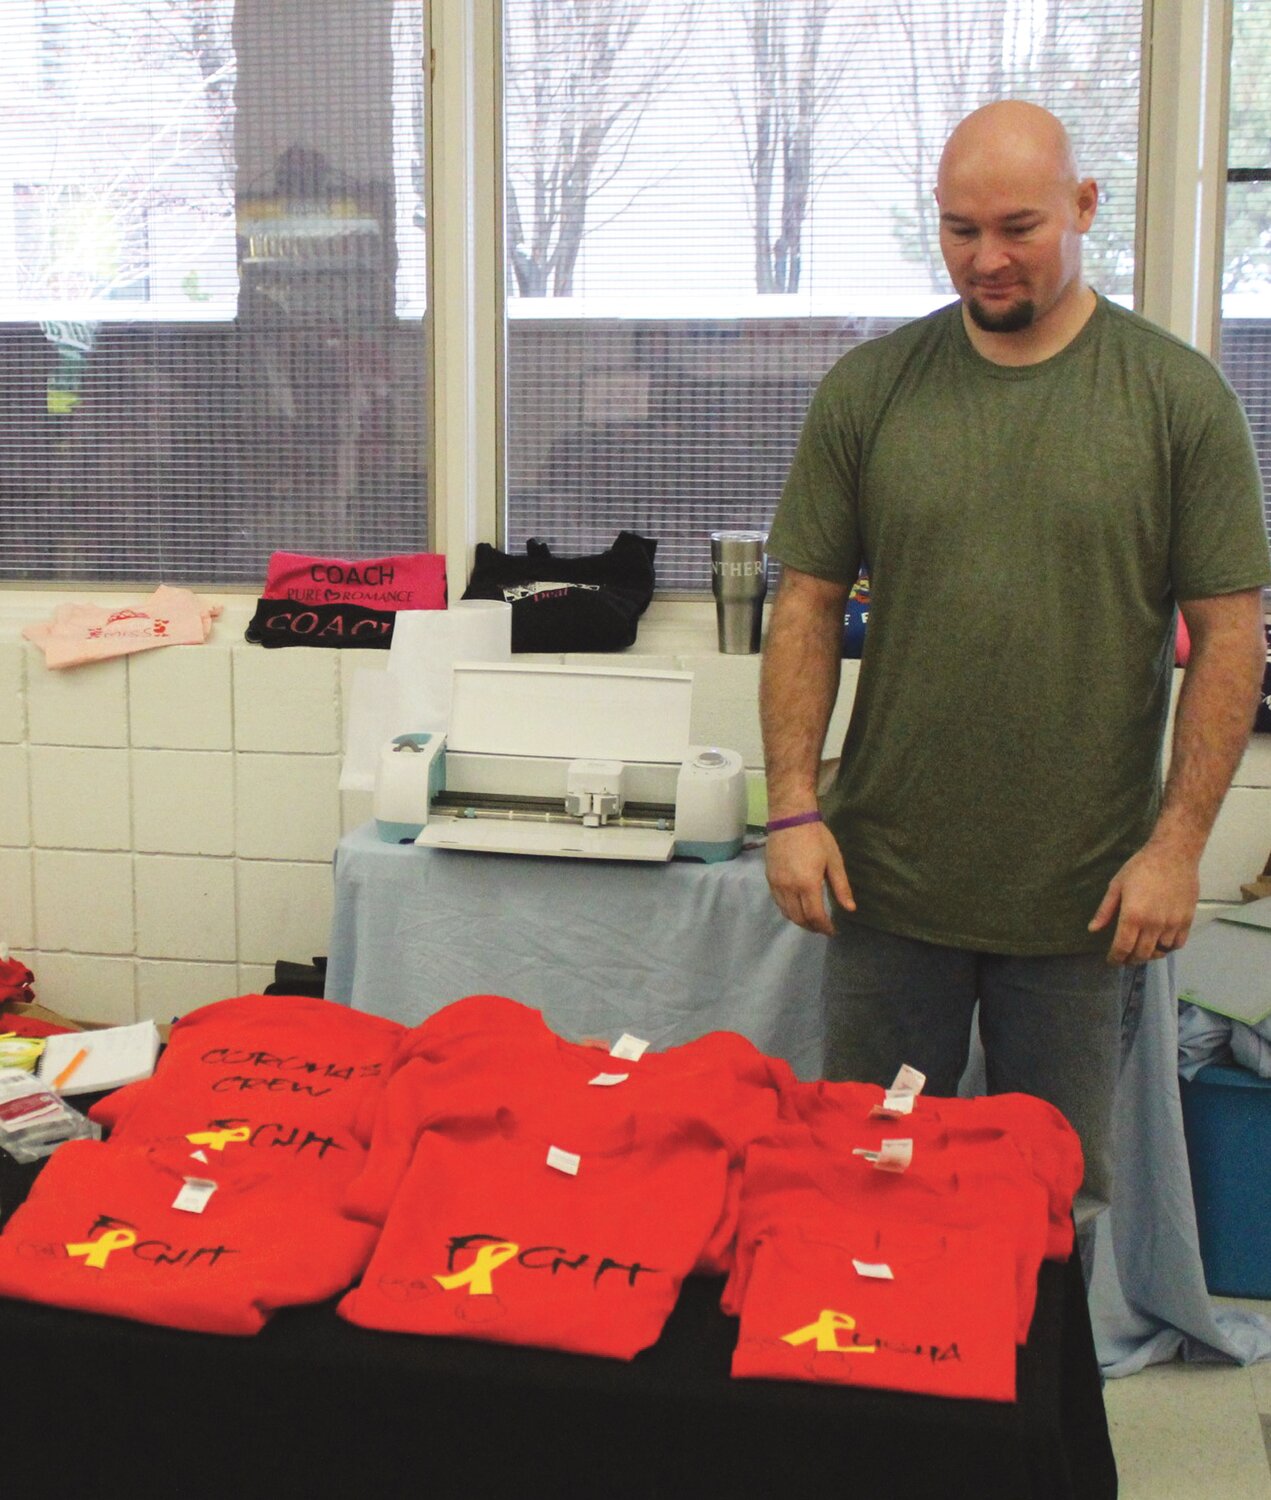 Sean Madsen, owner with wife Mistie of M&S Custom Vinyl in East Wenatchee, stands next to a display of red T-shirts designed for the Yahir Corona fundraiser.